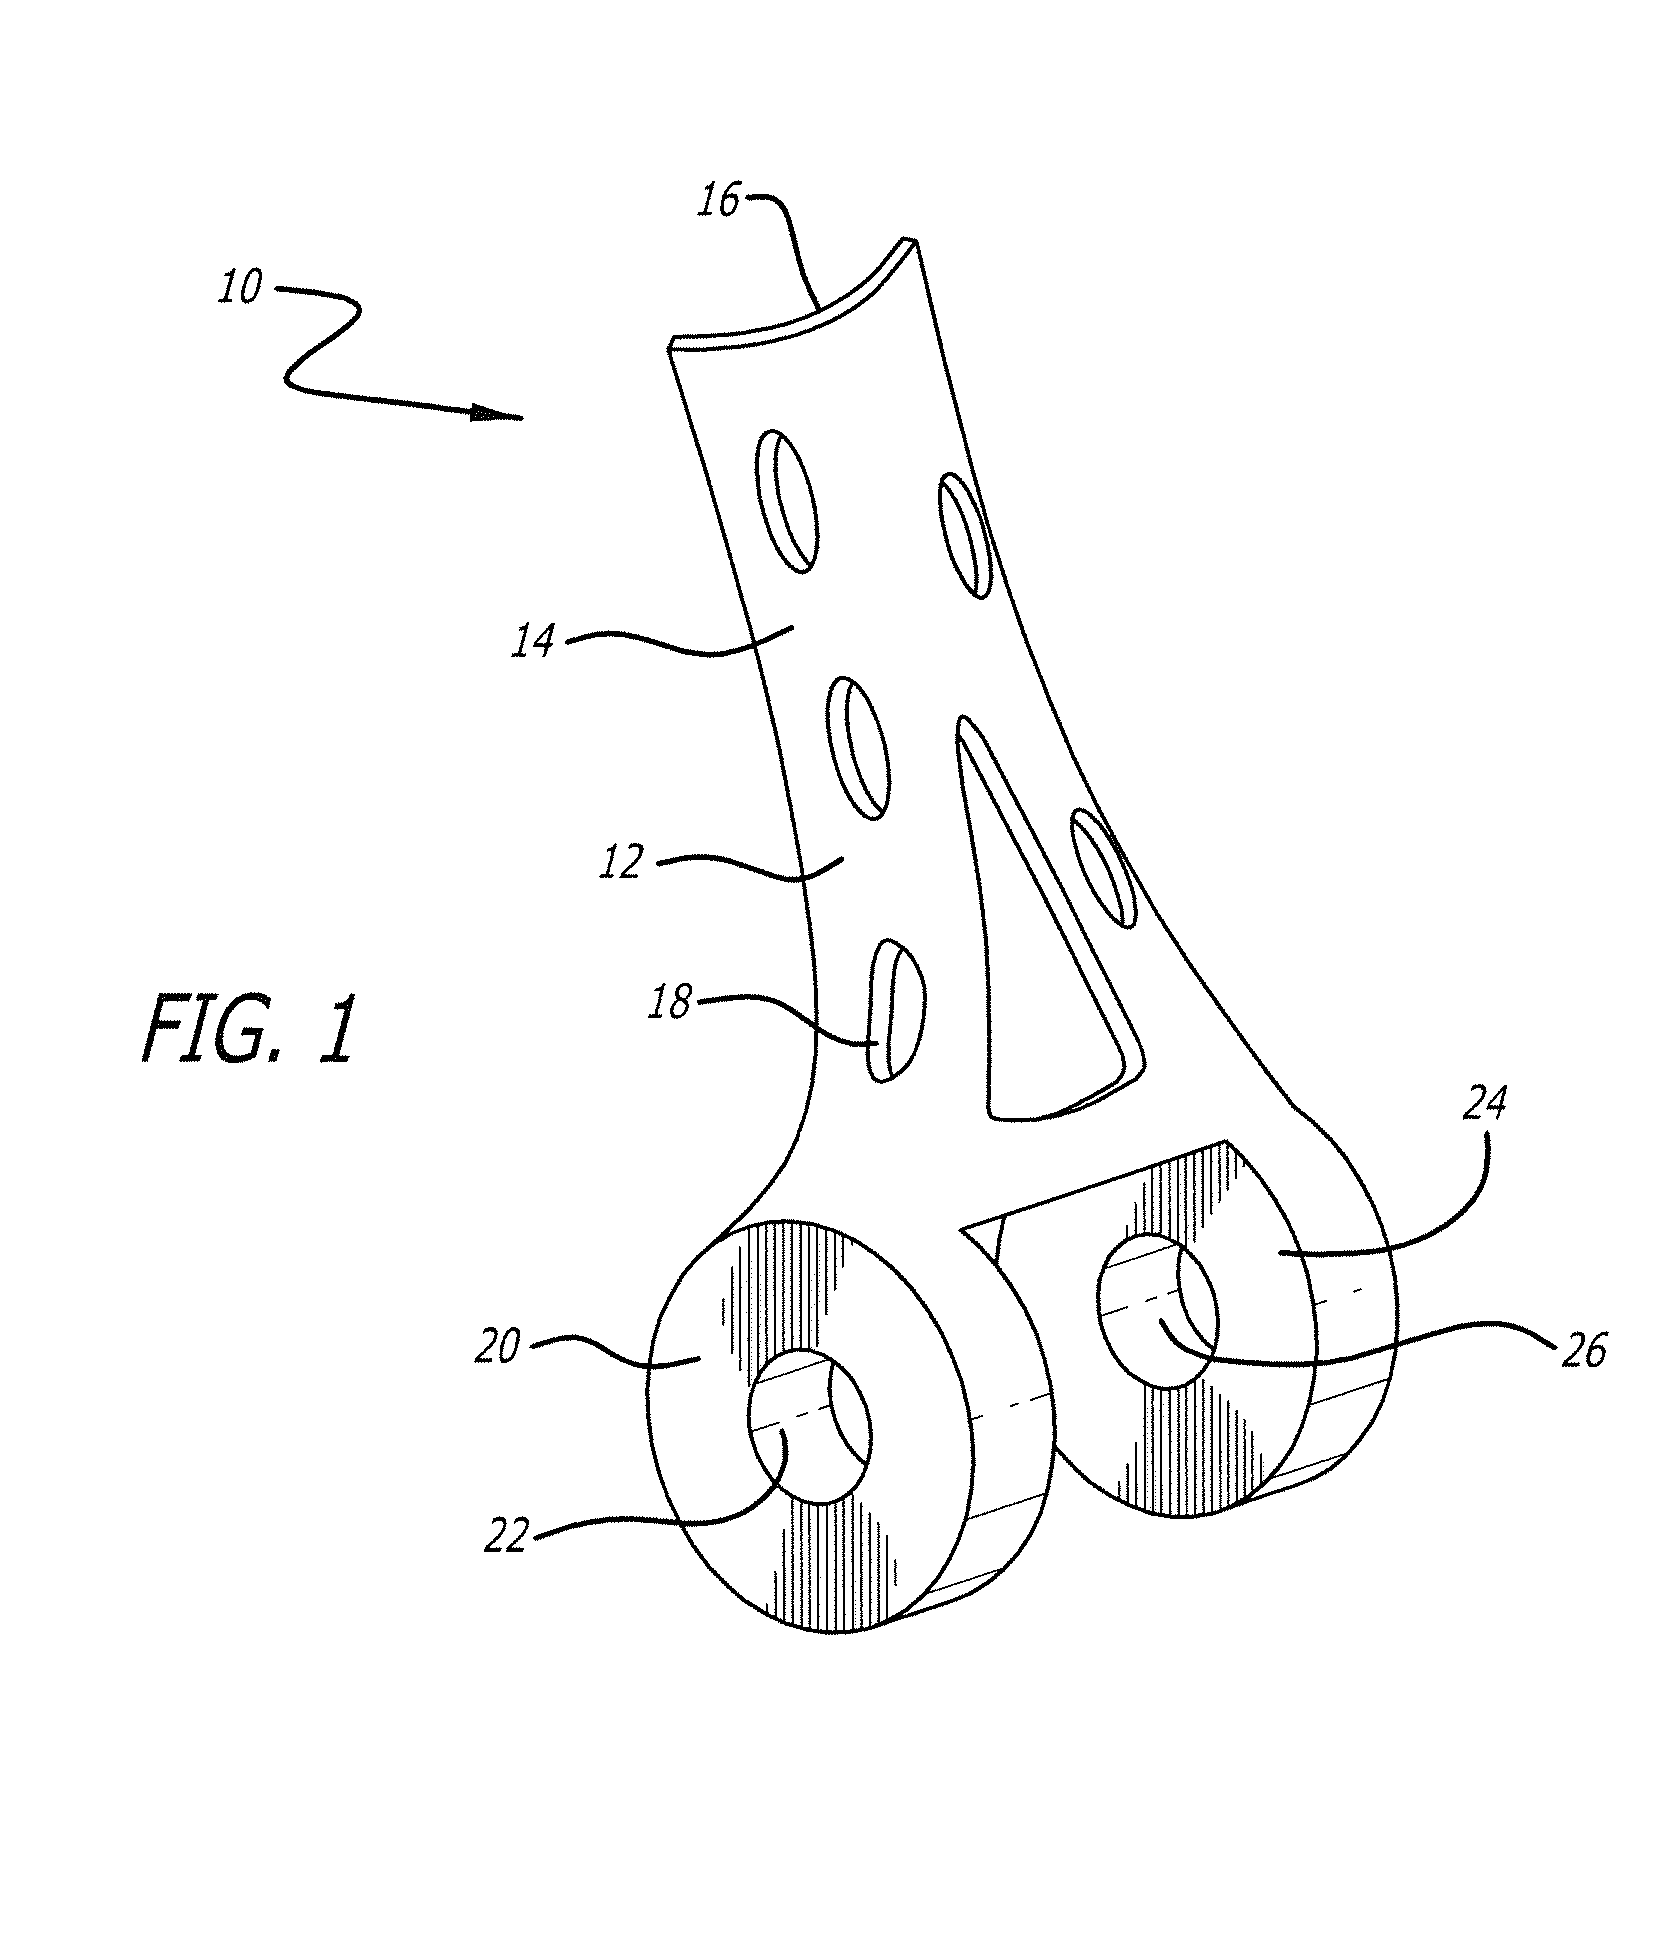 Bone joint replacement and repair assembly and method of repairing and replacing a bone joint